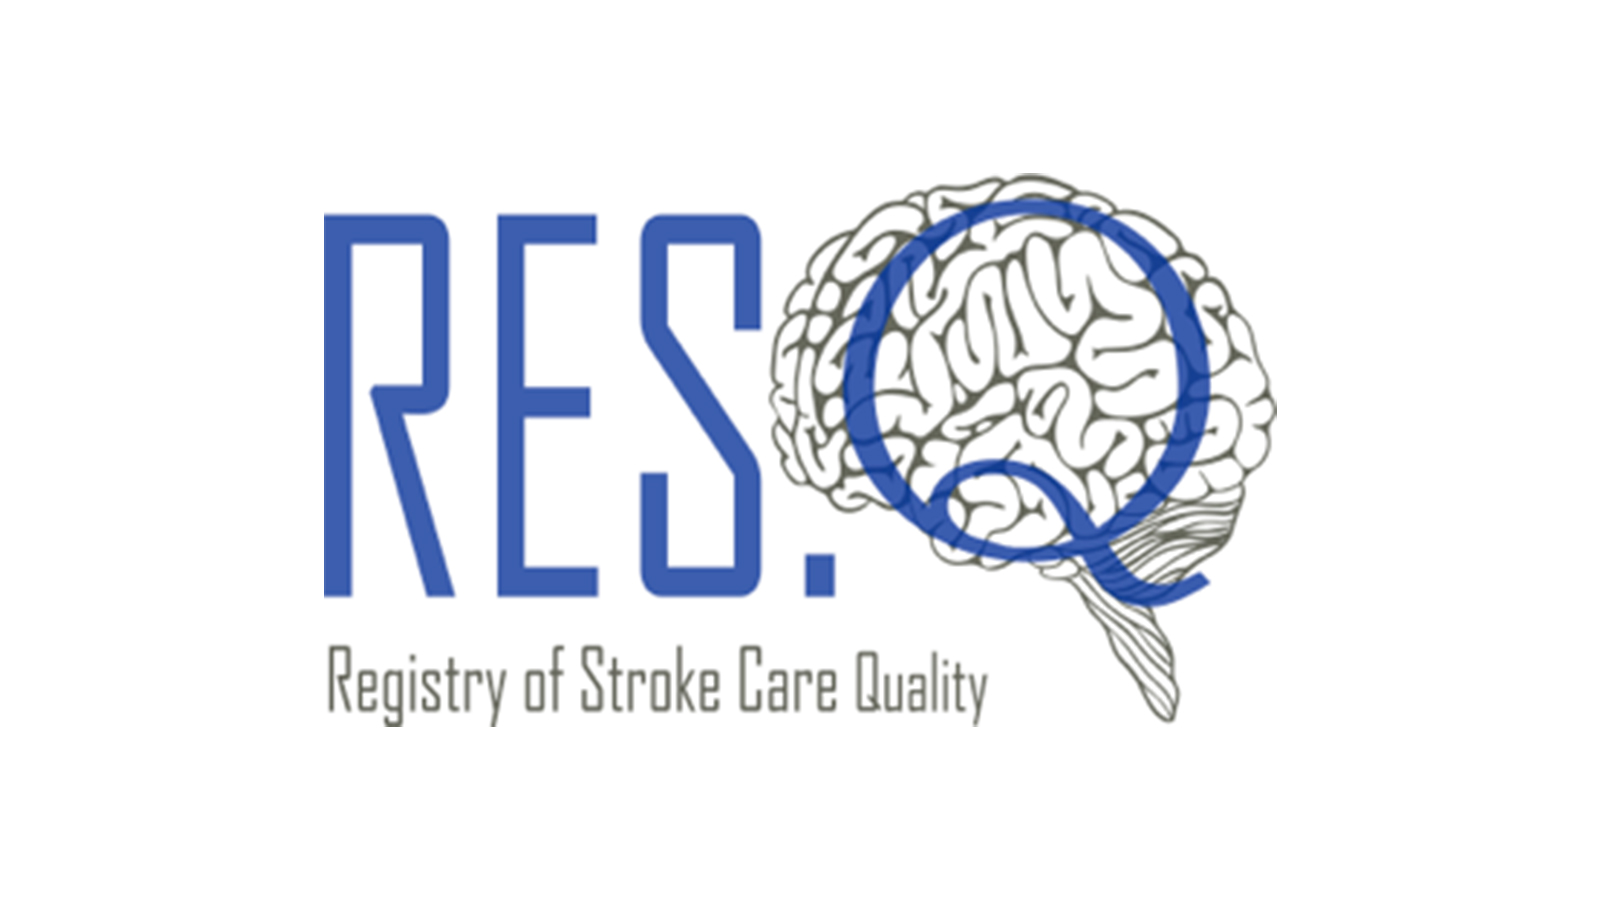 Registry of Stroke Care Quality